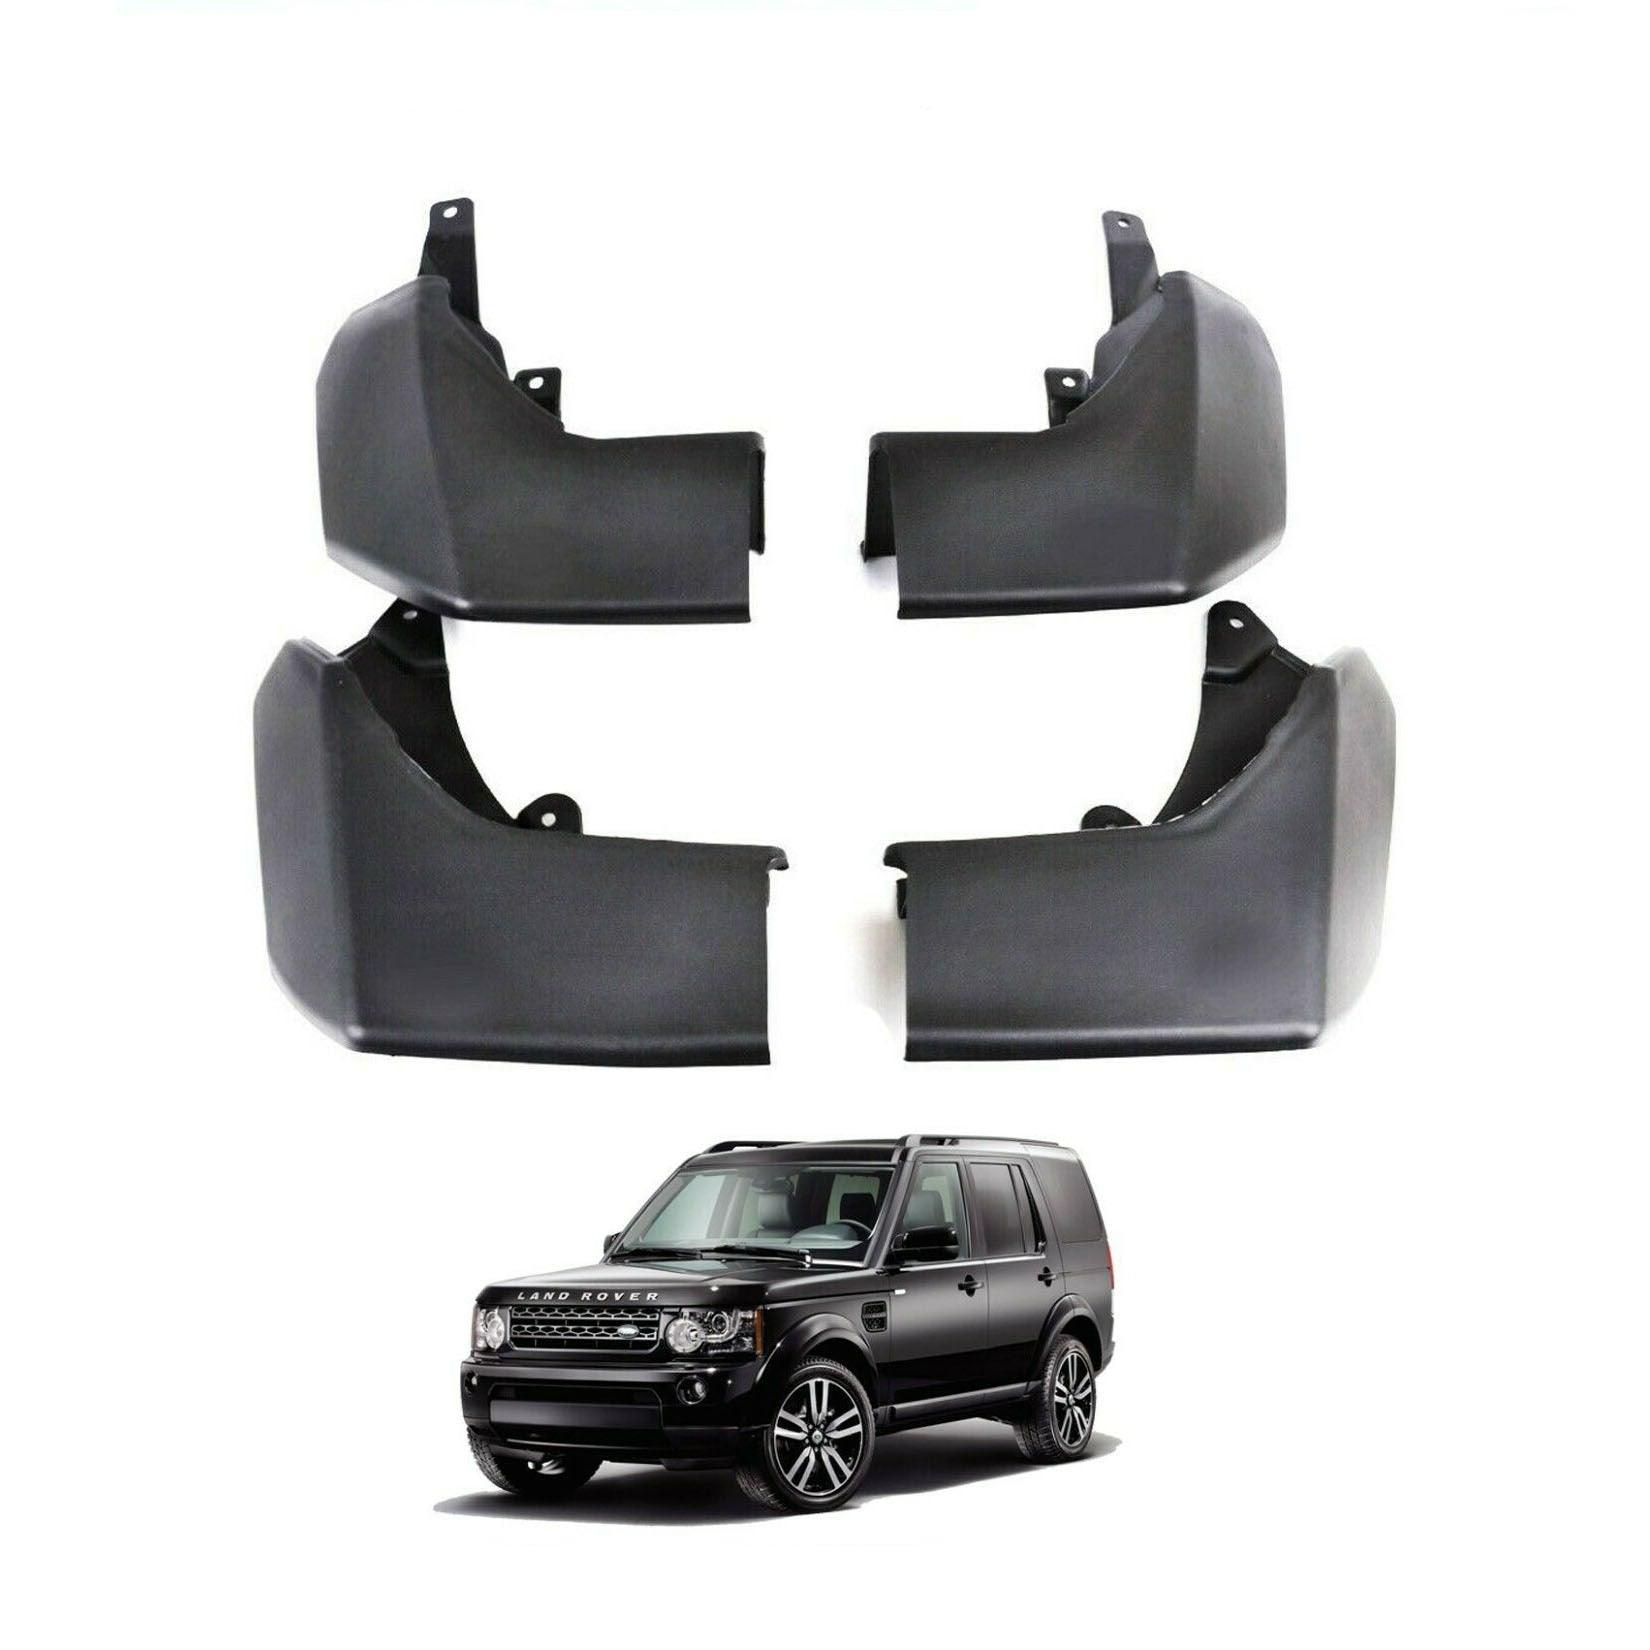 LAND ROVER DISCOVERY 4 2009-2015 STX MUD FLAPS - 4PC SET - Storm Xccessories2